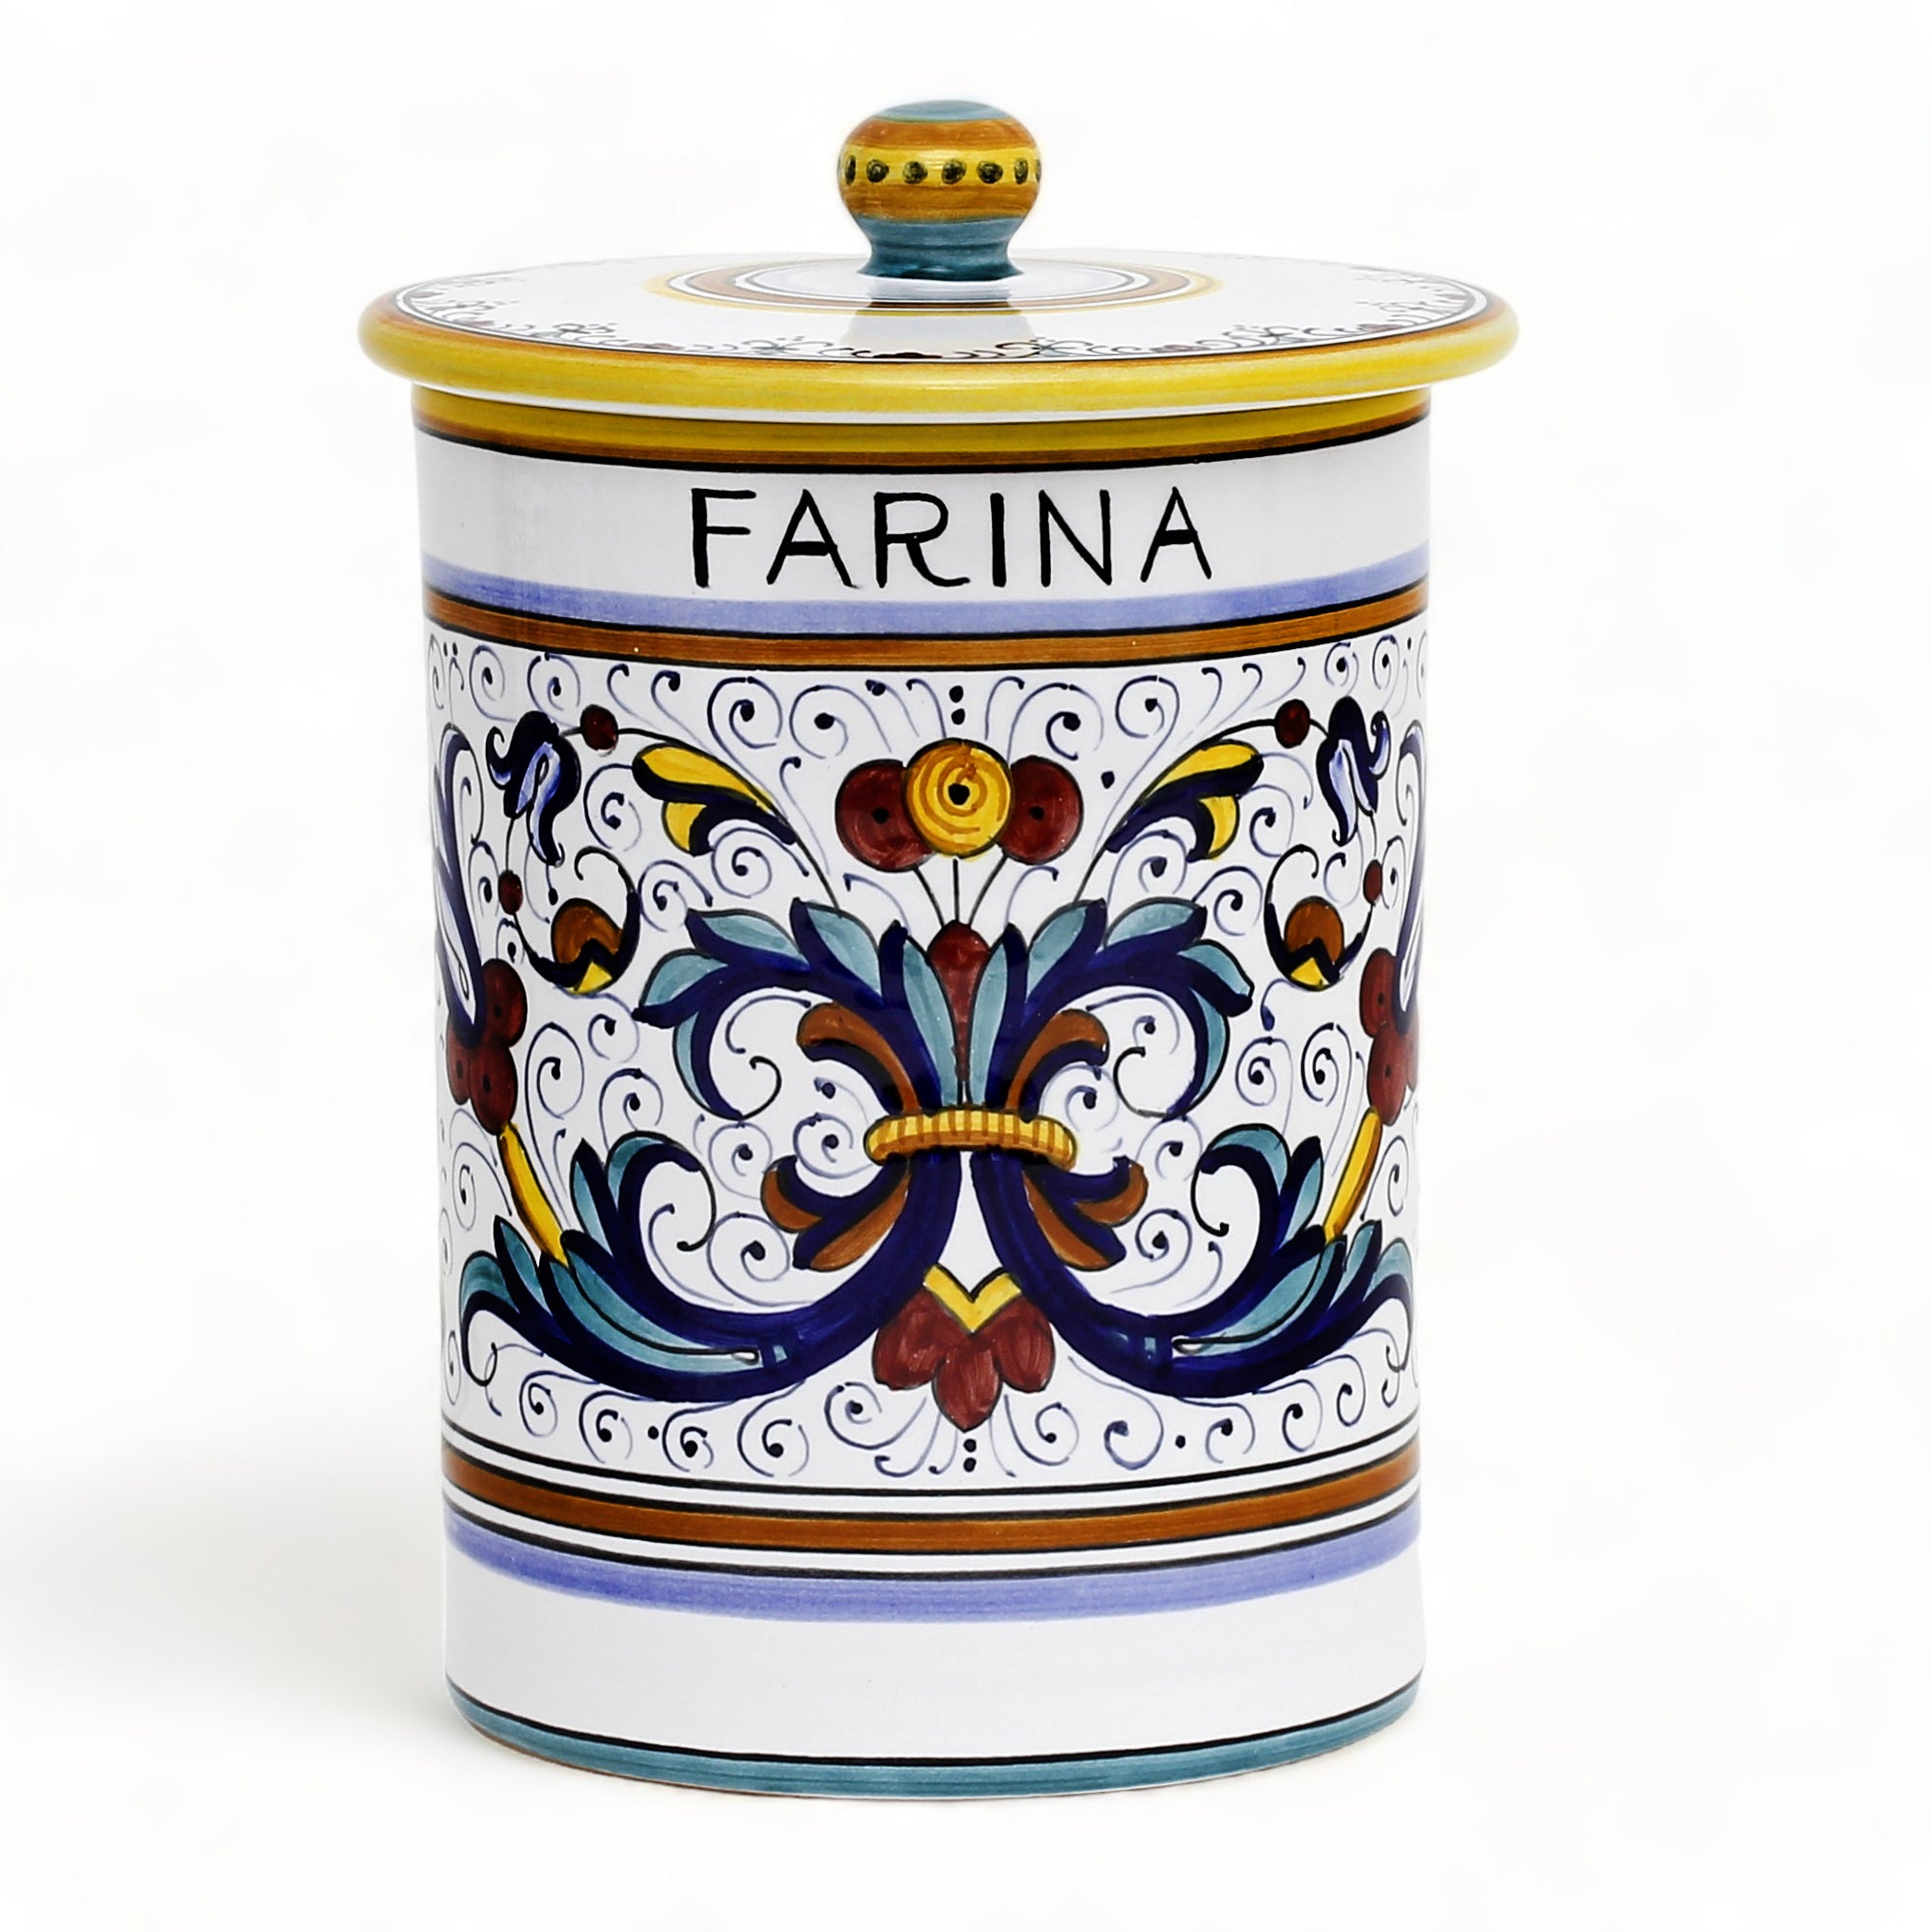 RICCO DERUTA DELUXE: Canister with Ceramic Lid - 'FARINA' (Flour)